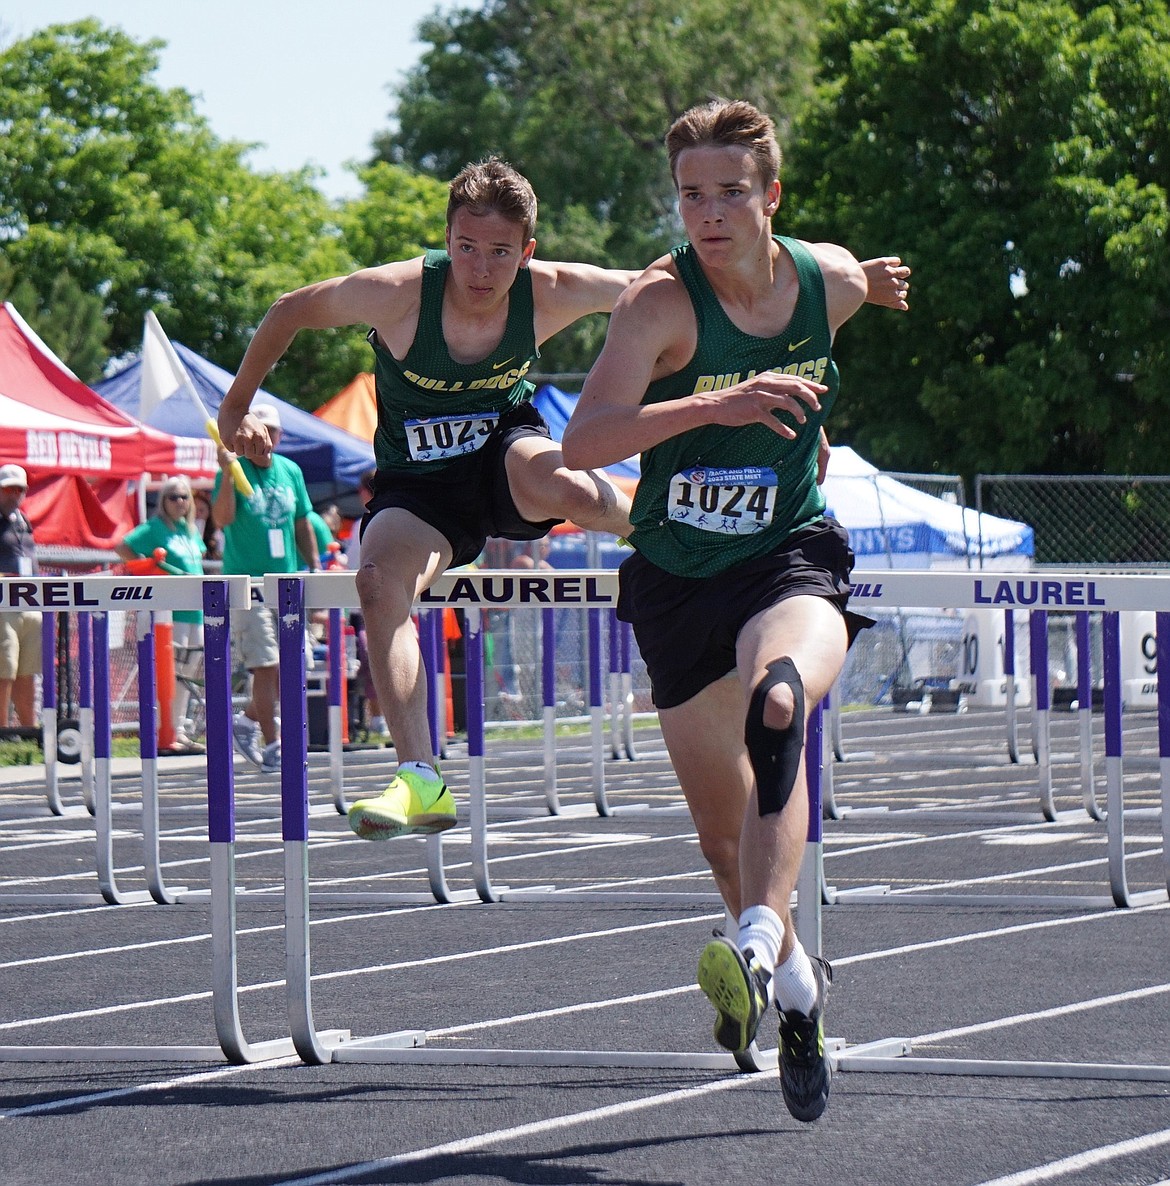 Brothers Bowdrie (left) and Carson Krack compete side-by-side during the men’s 110 meter hurdle finals on Saturday. Carson earned the bragging rights on this occasion recording a personal best time of 15.90 and sixth position on the podium. (Matt Weller photo)